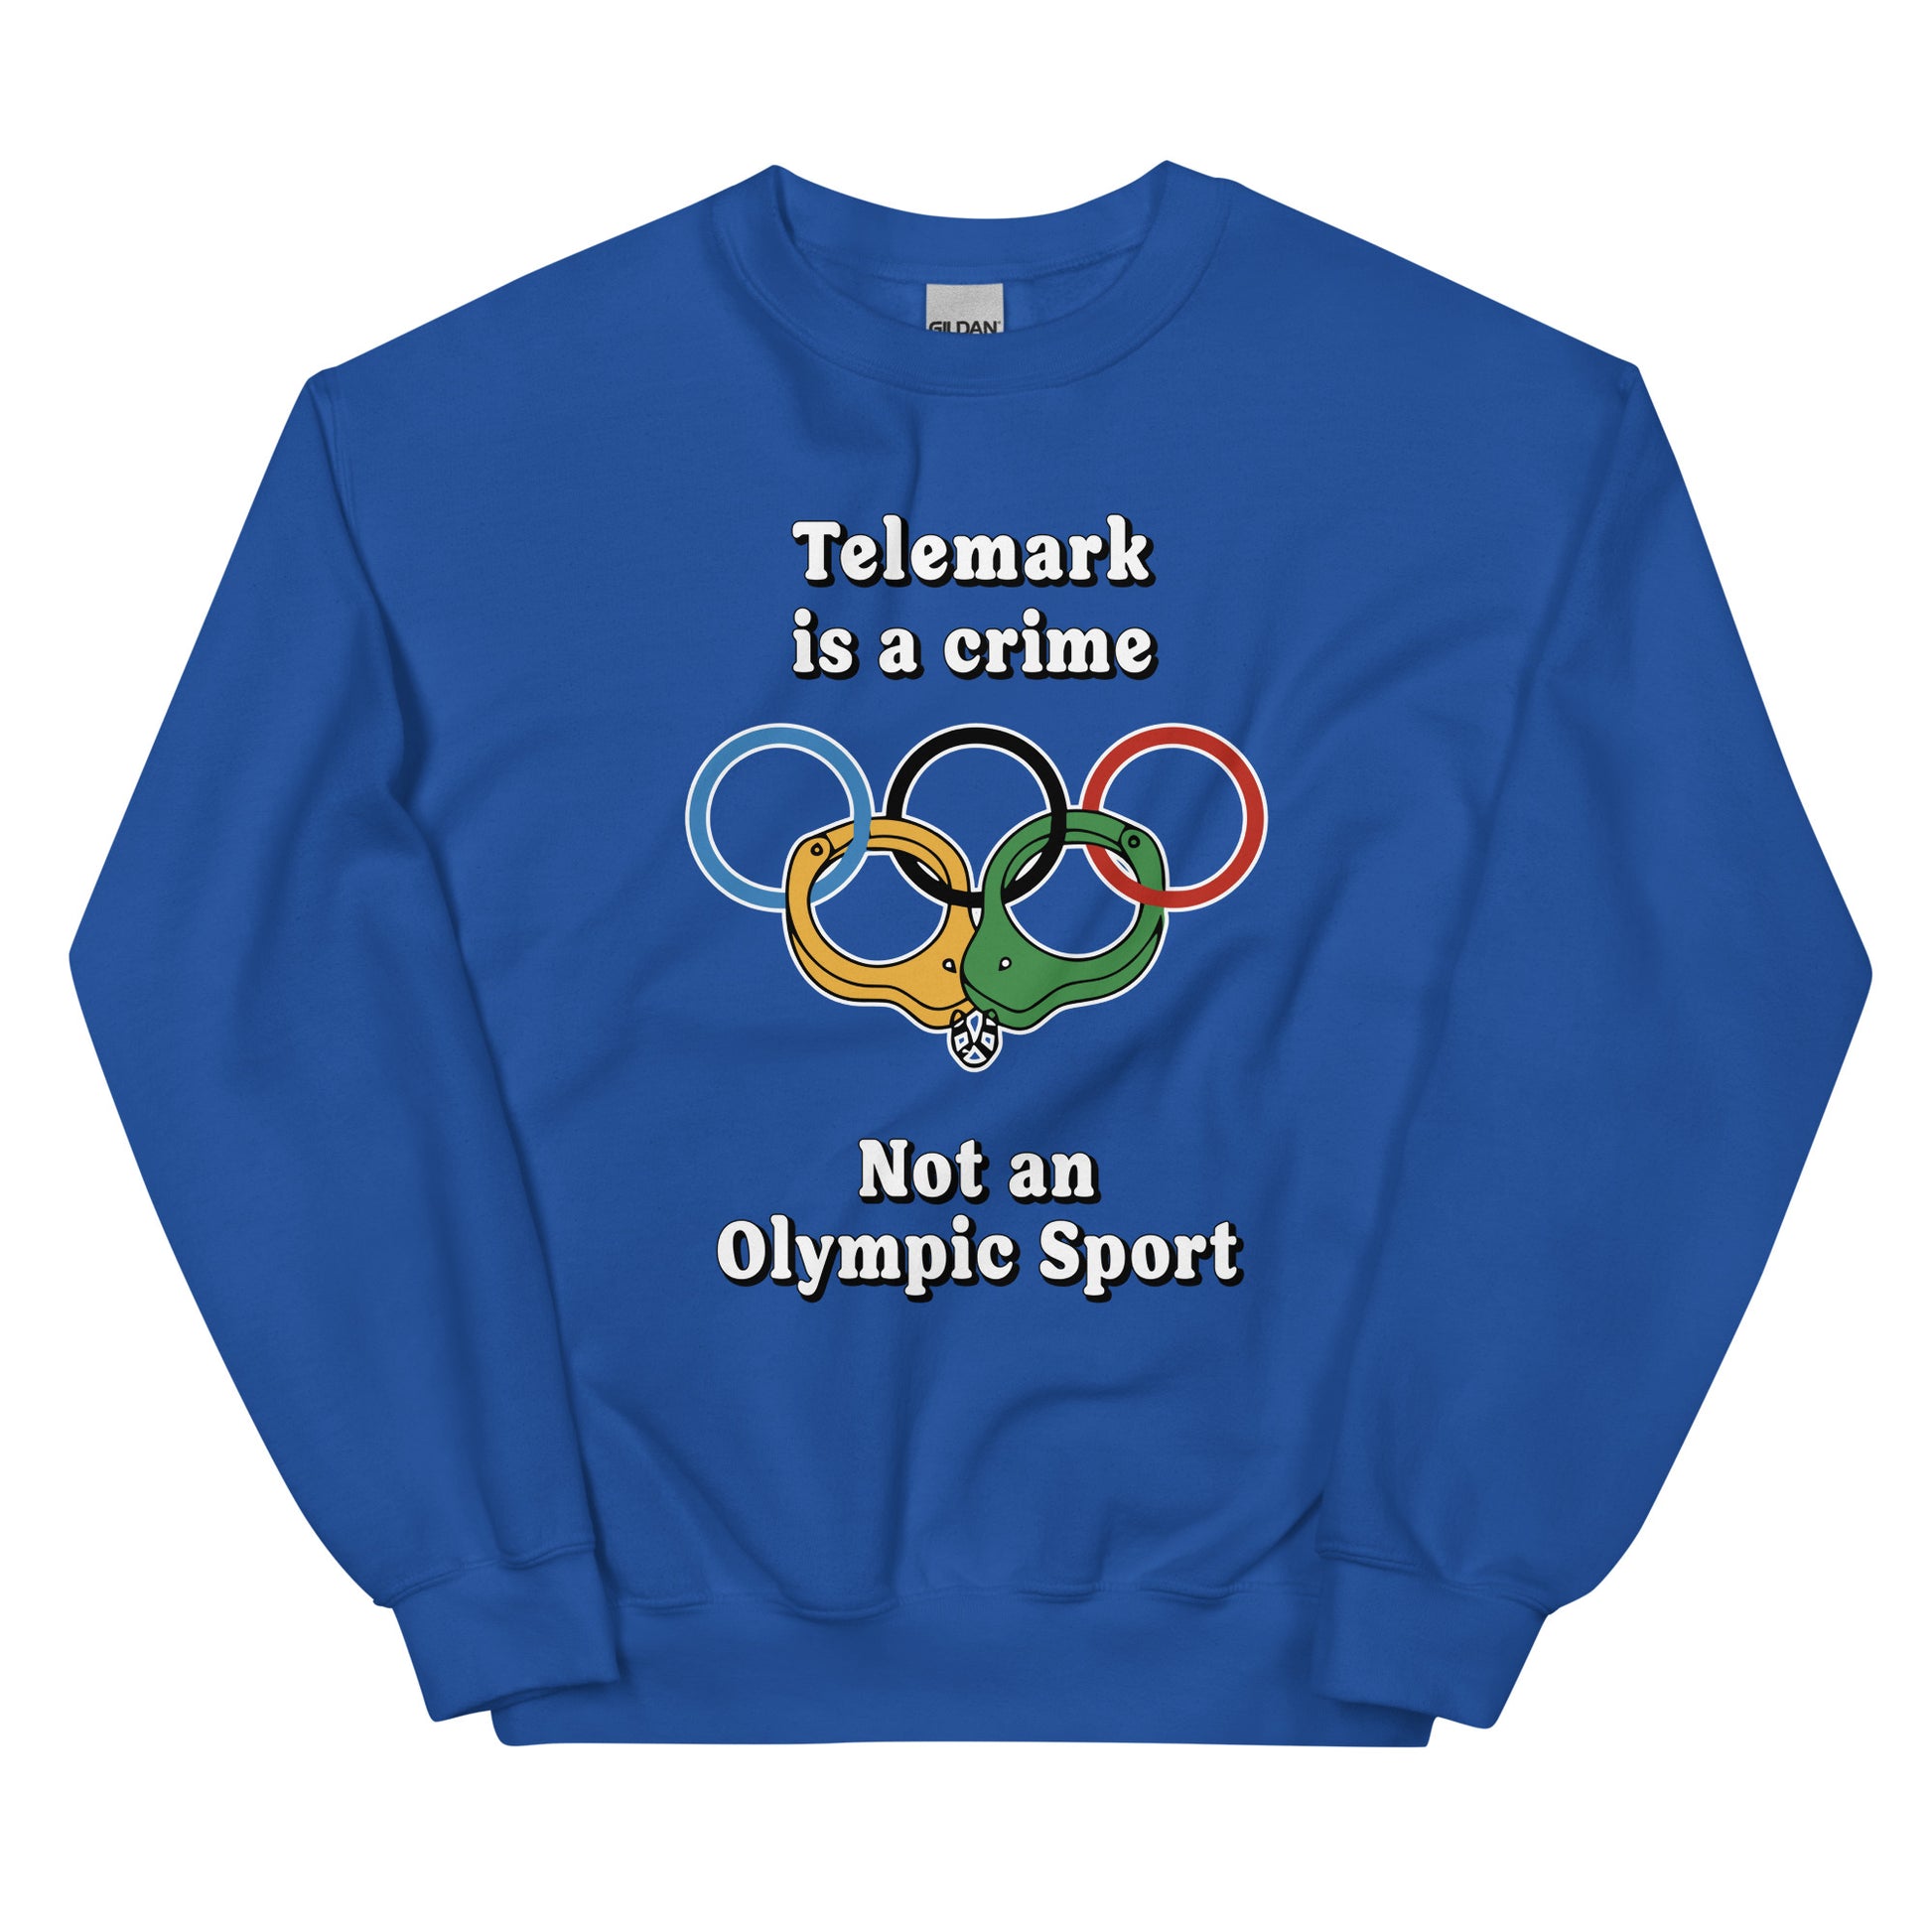 Telemark is a crime not an olympic sport design printed on a crewneck sweatshirt by Whistler Shirts